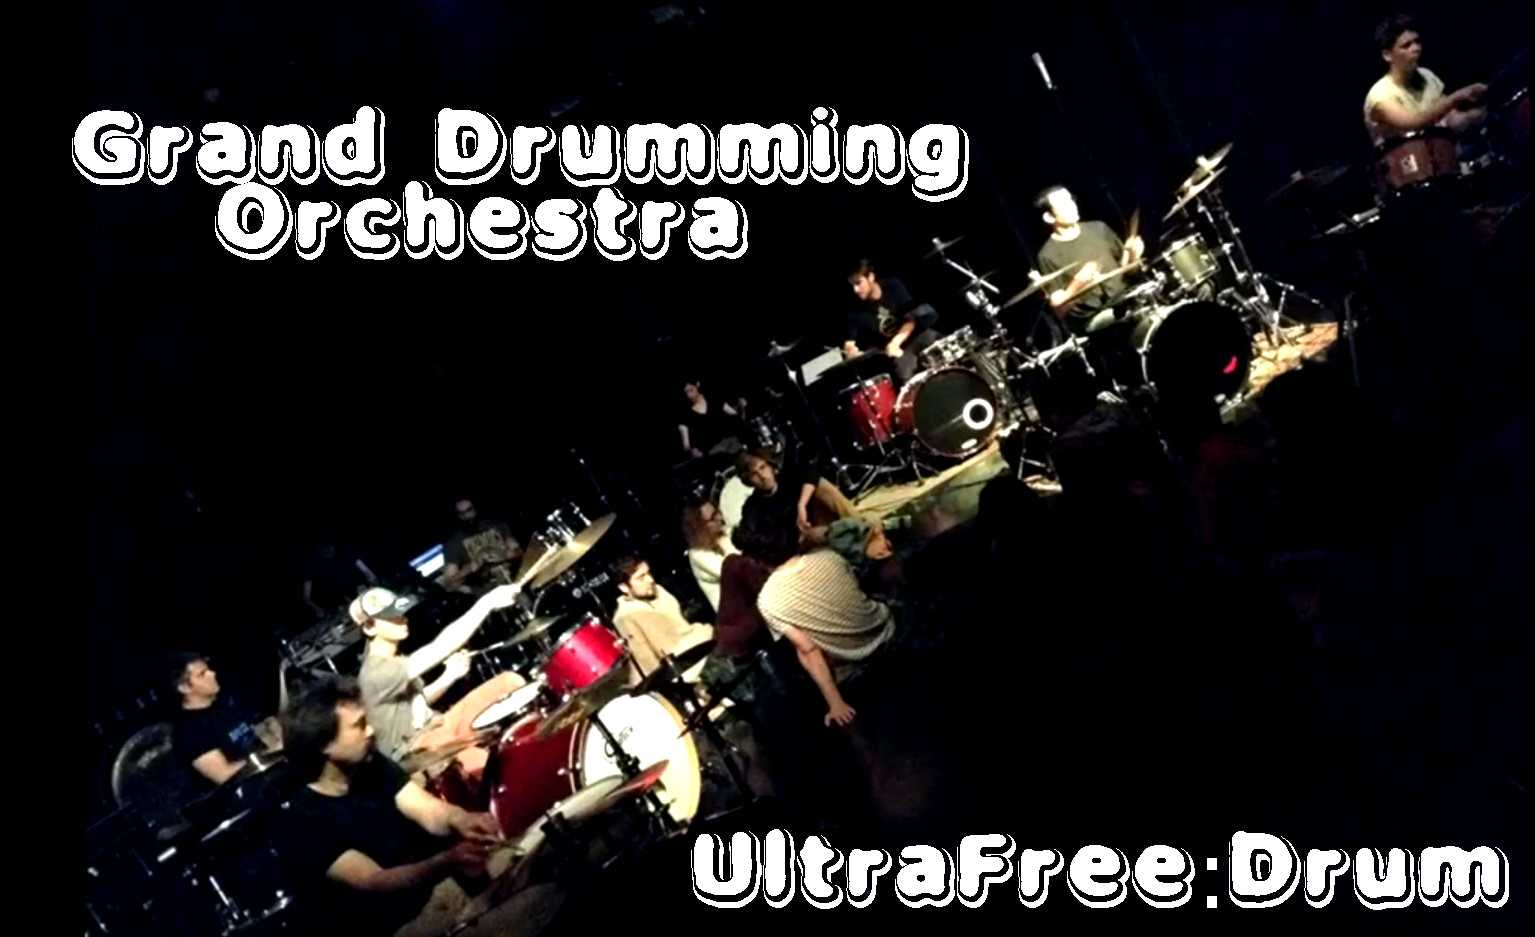 UltraFree:Drums avec le Grand Drumming Orchestra